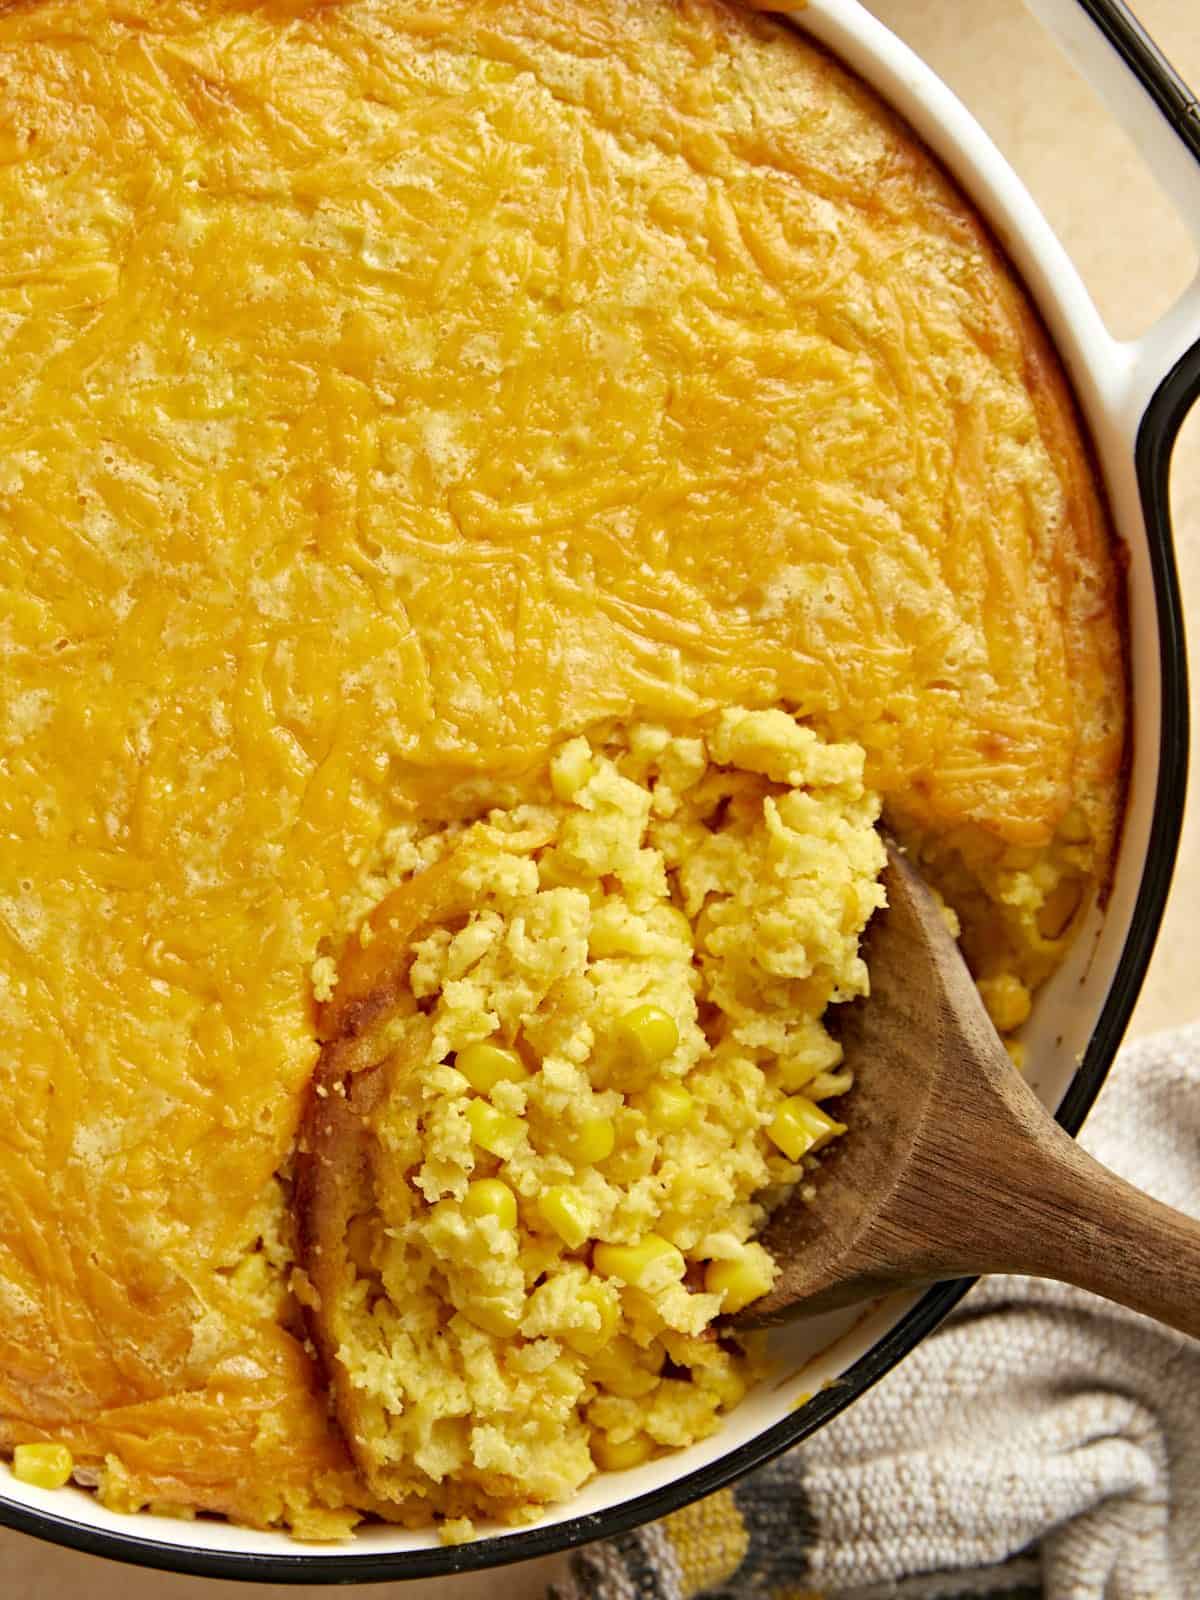 Close up overhead view of corn pudding in the casserole dish with a wooden spoon scooping some out.